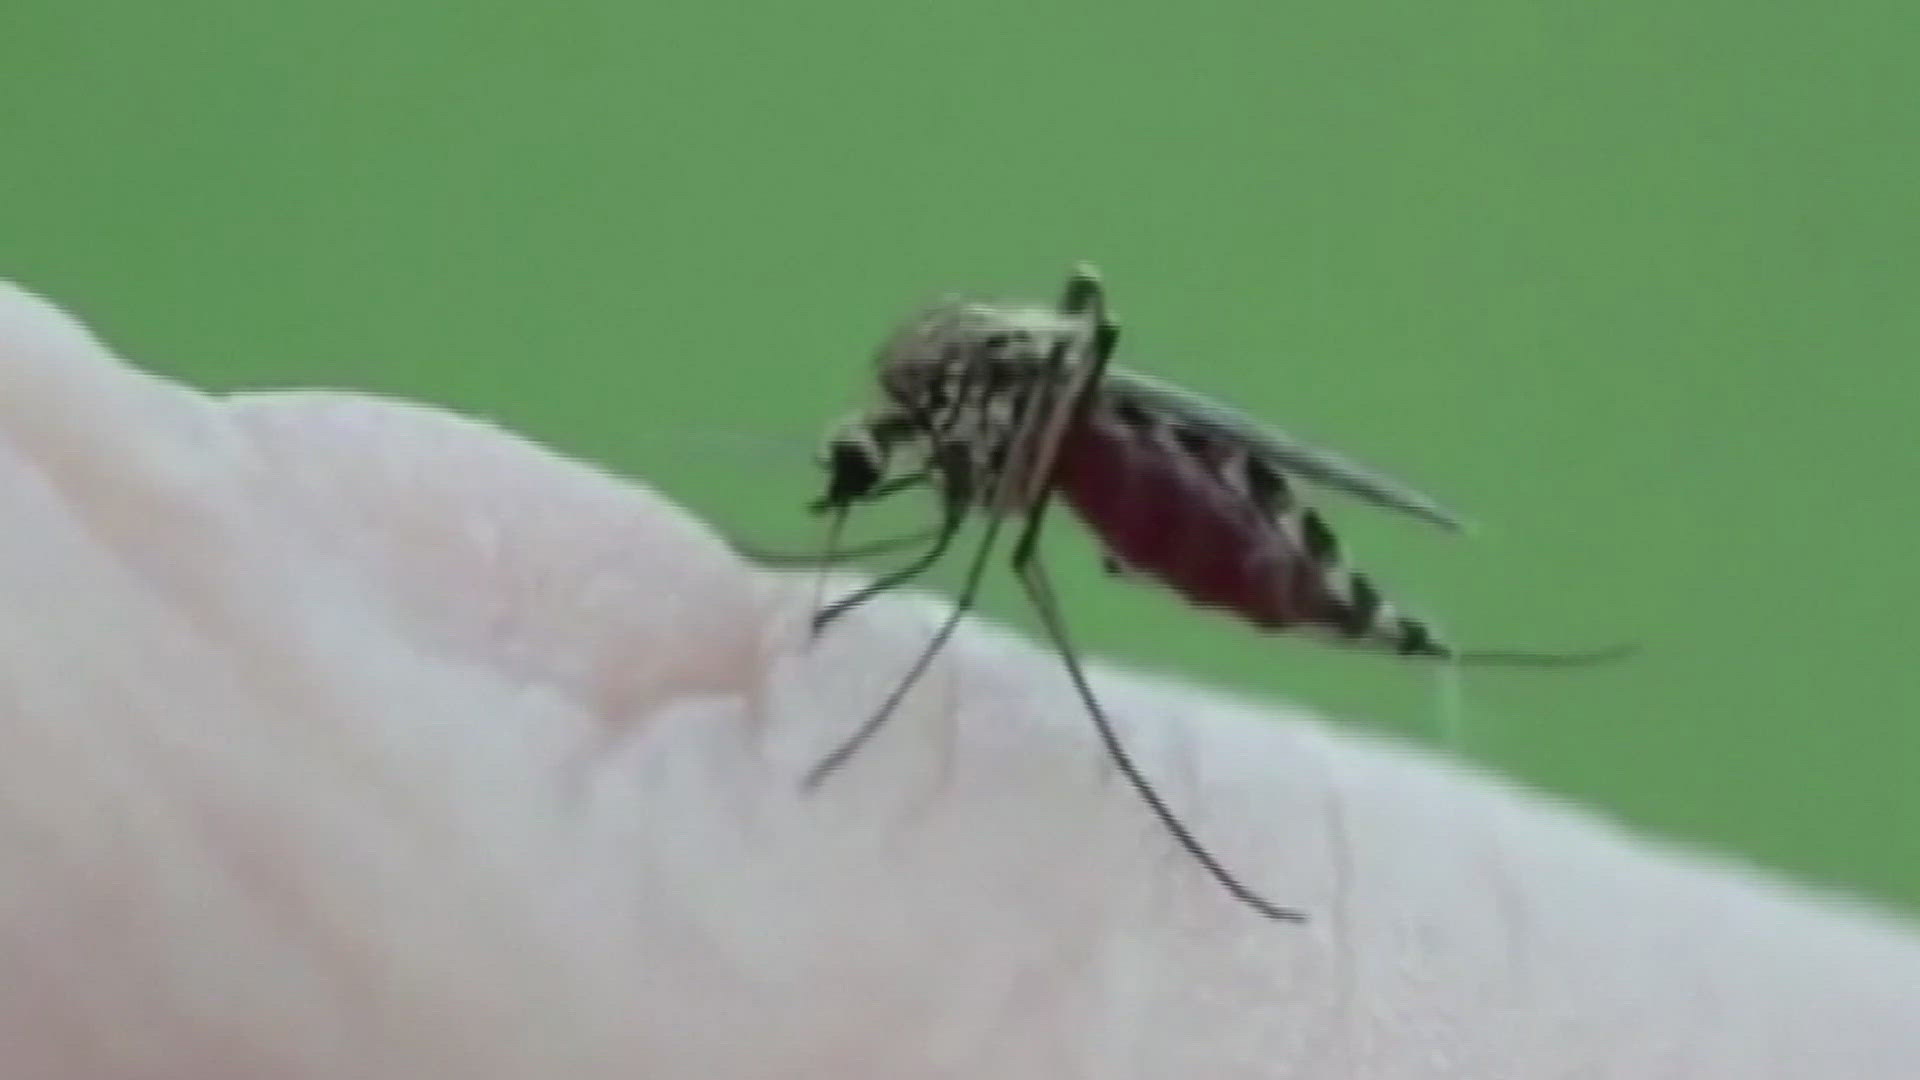 Health Services urges people to not give mosquitos a biting chance by following several tips, including wearing long sleeves and pants and applying insect repellent.